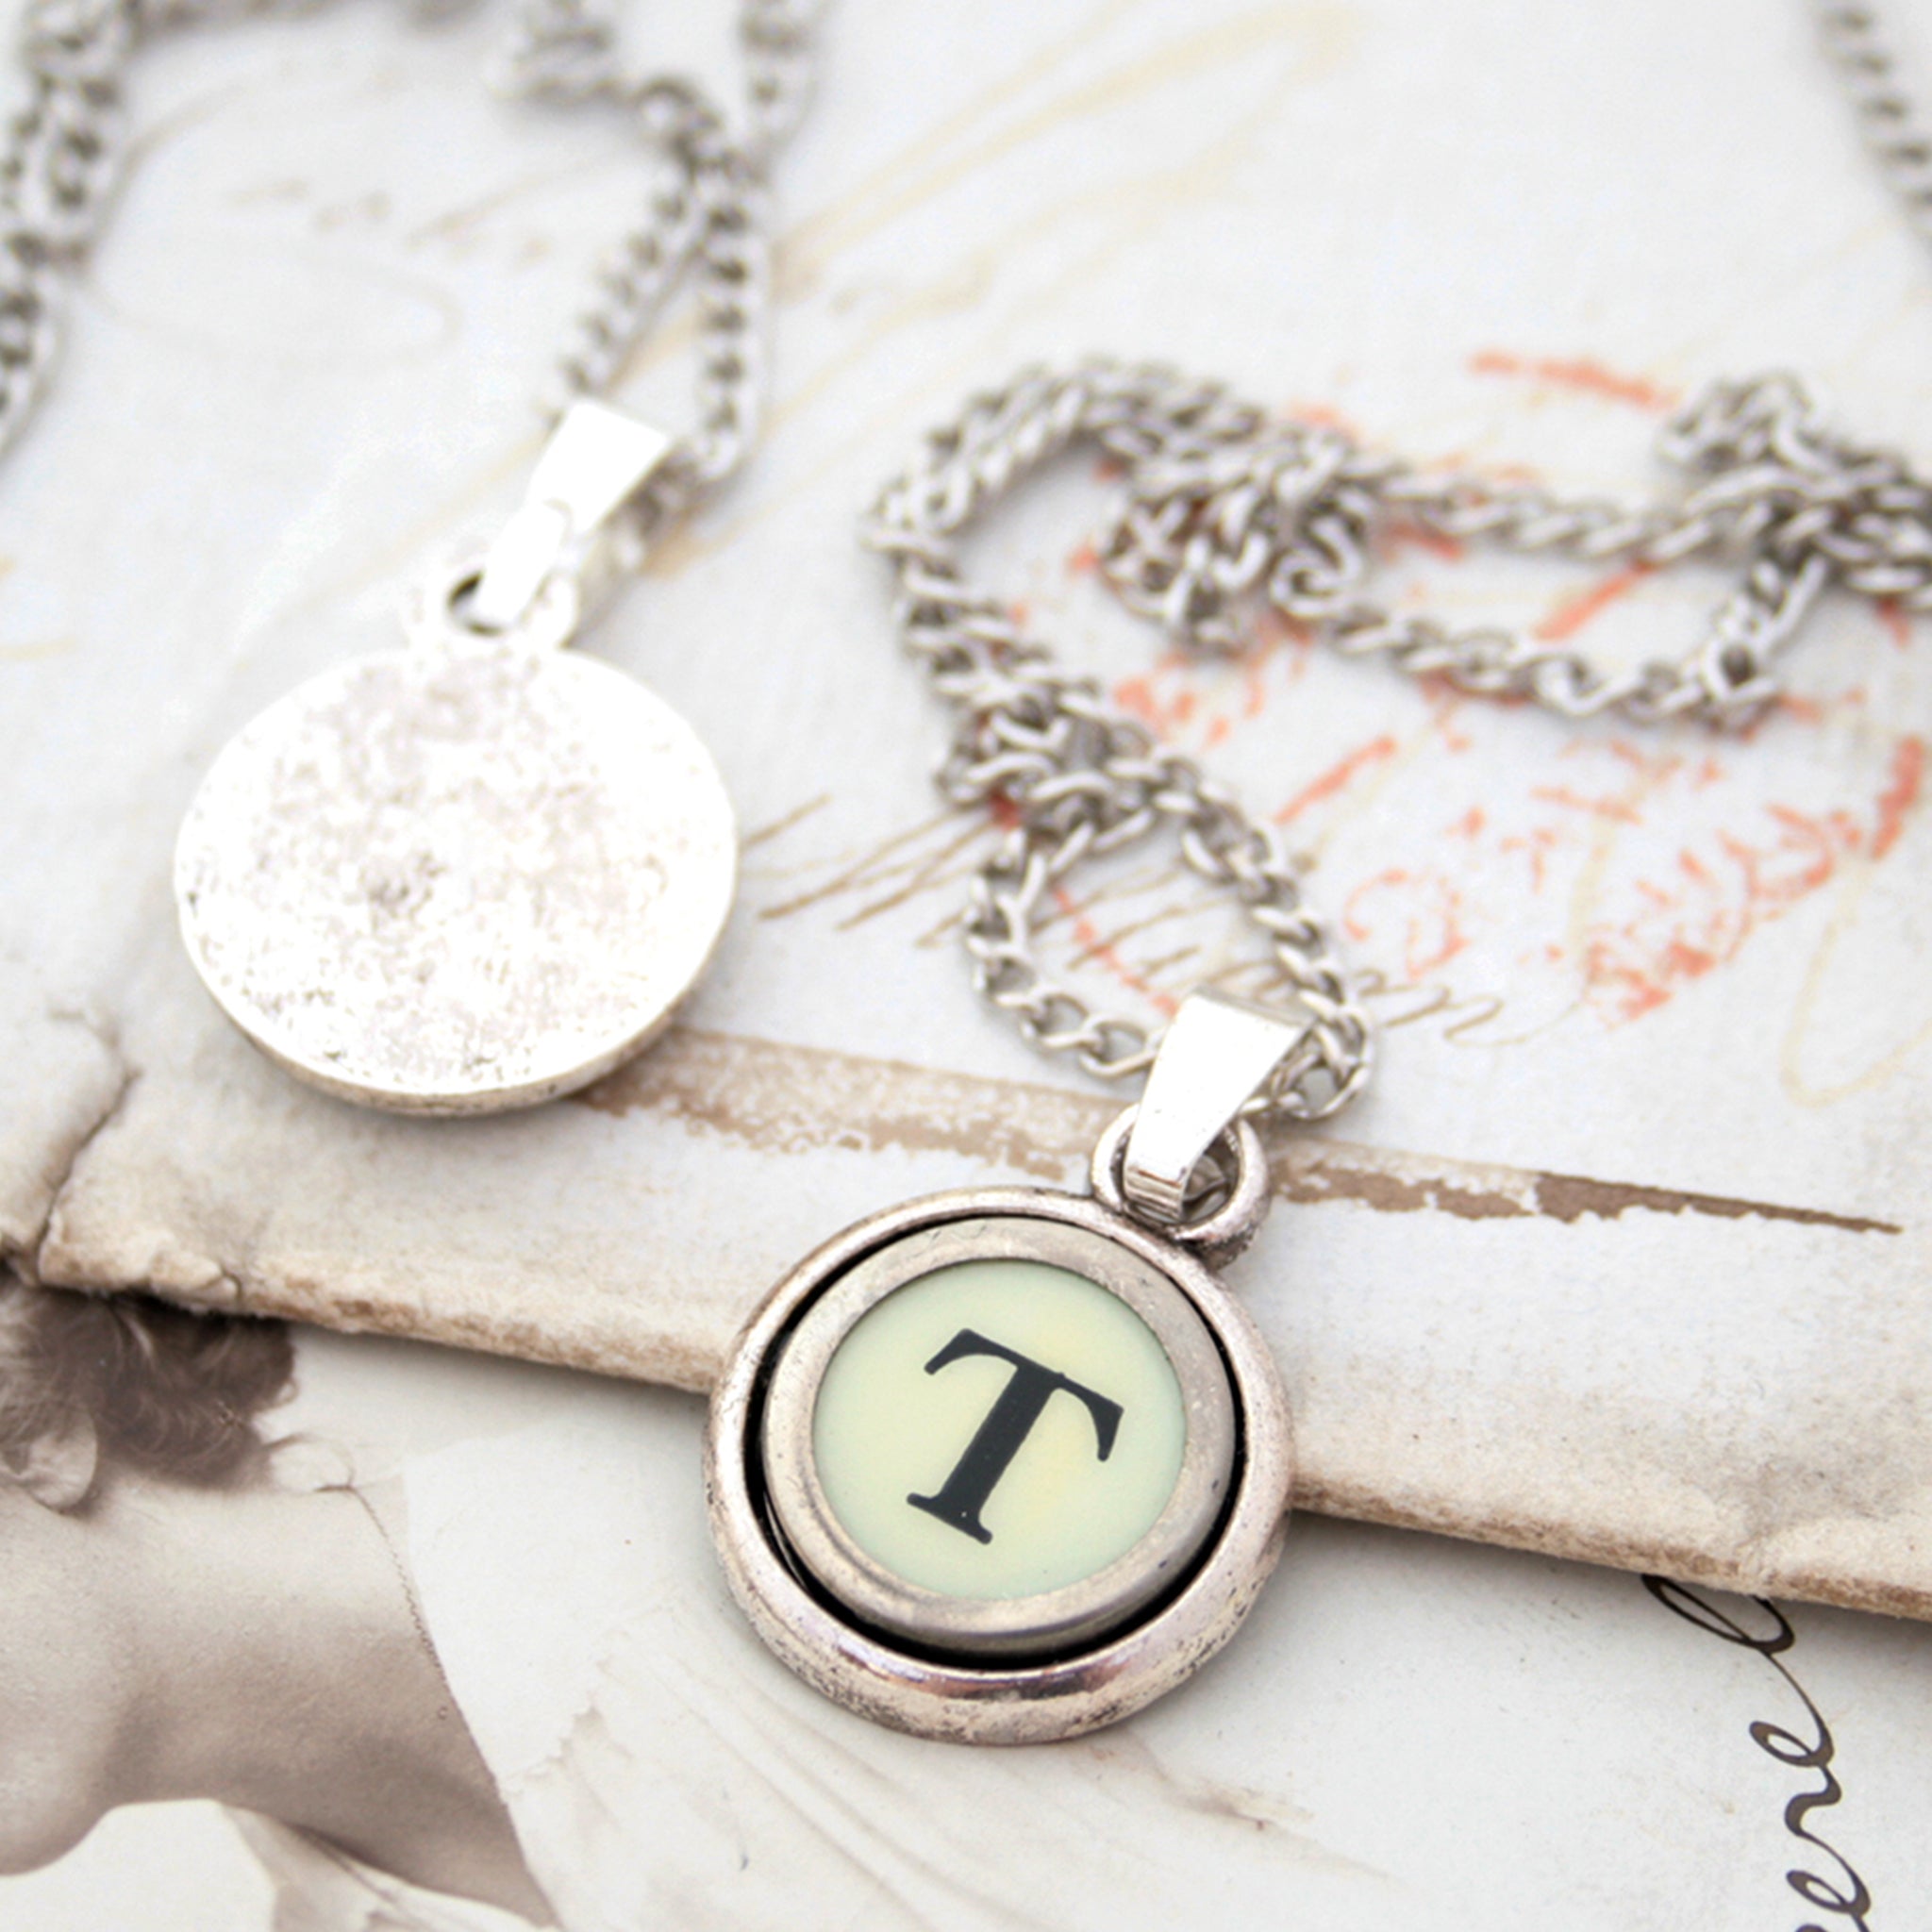 Ivory T letter necklace made of typewriter key